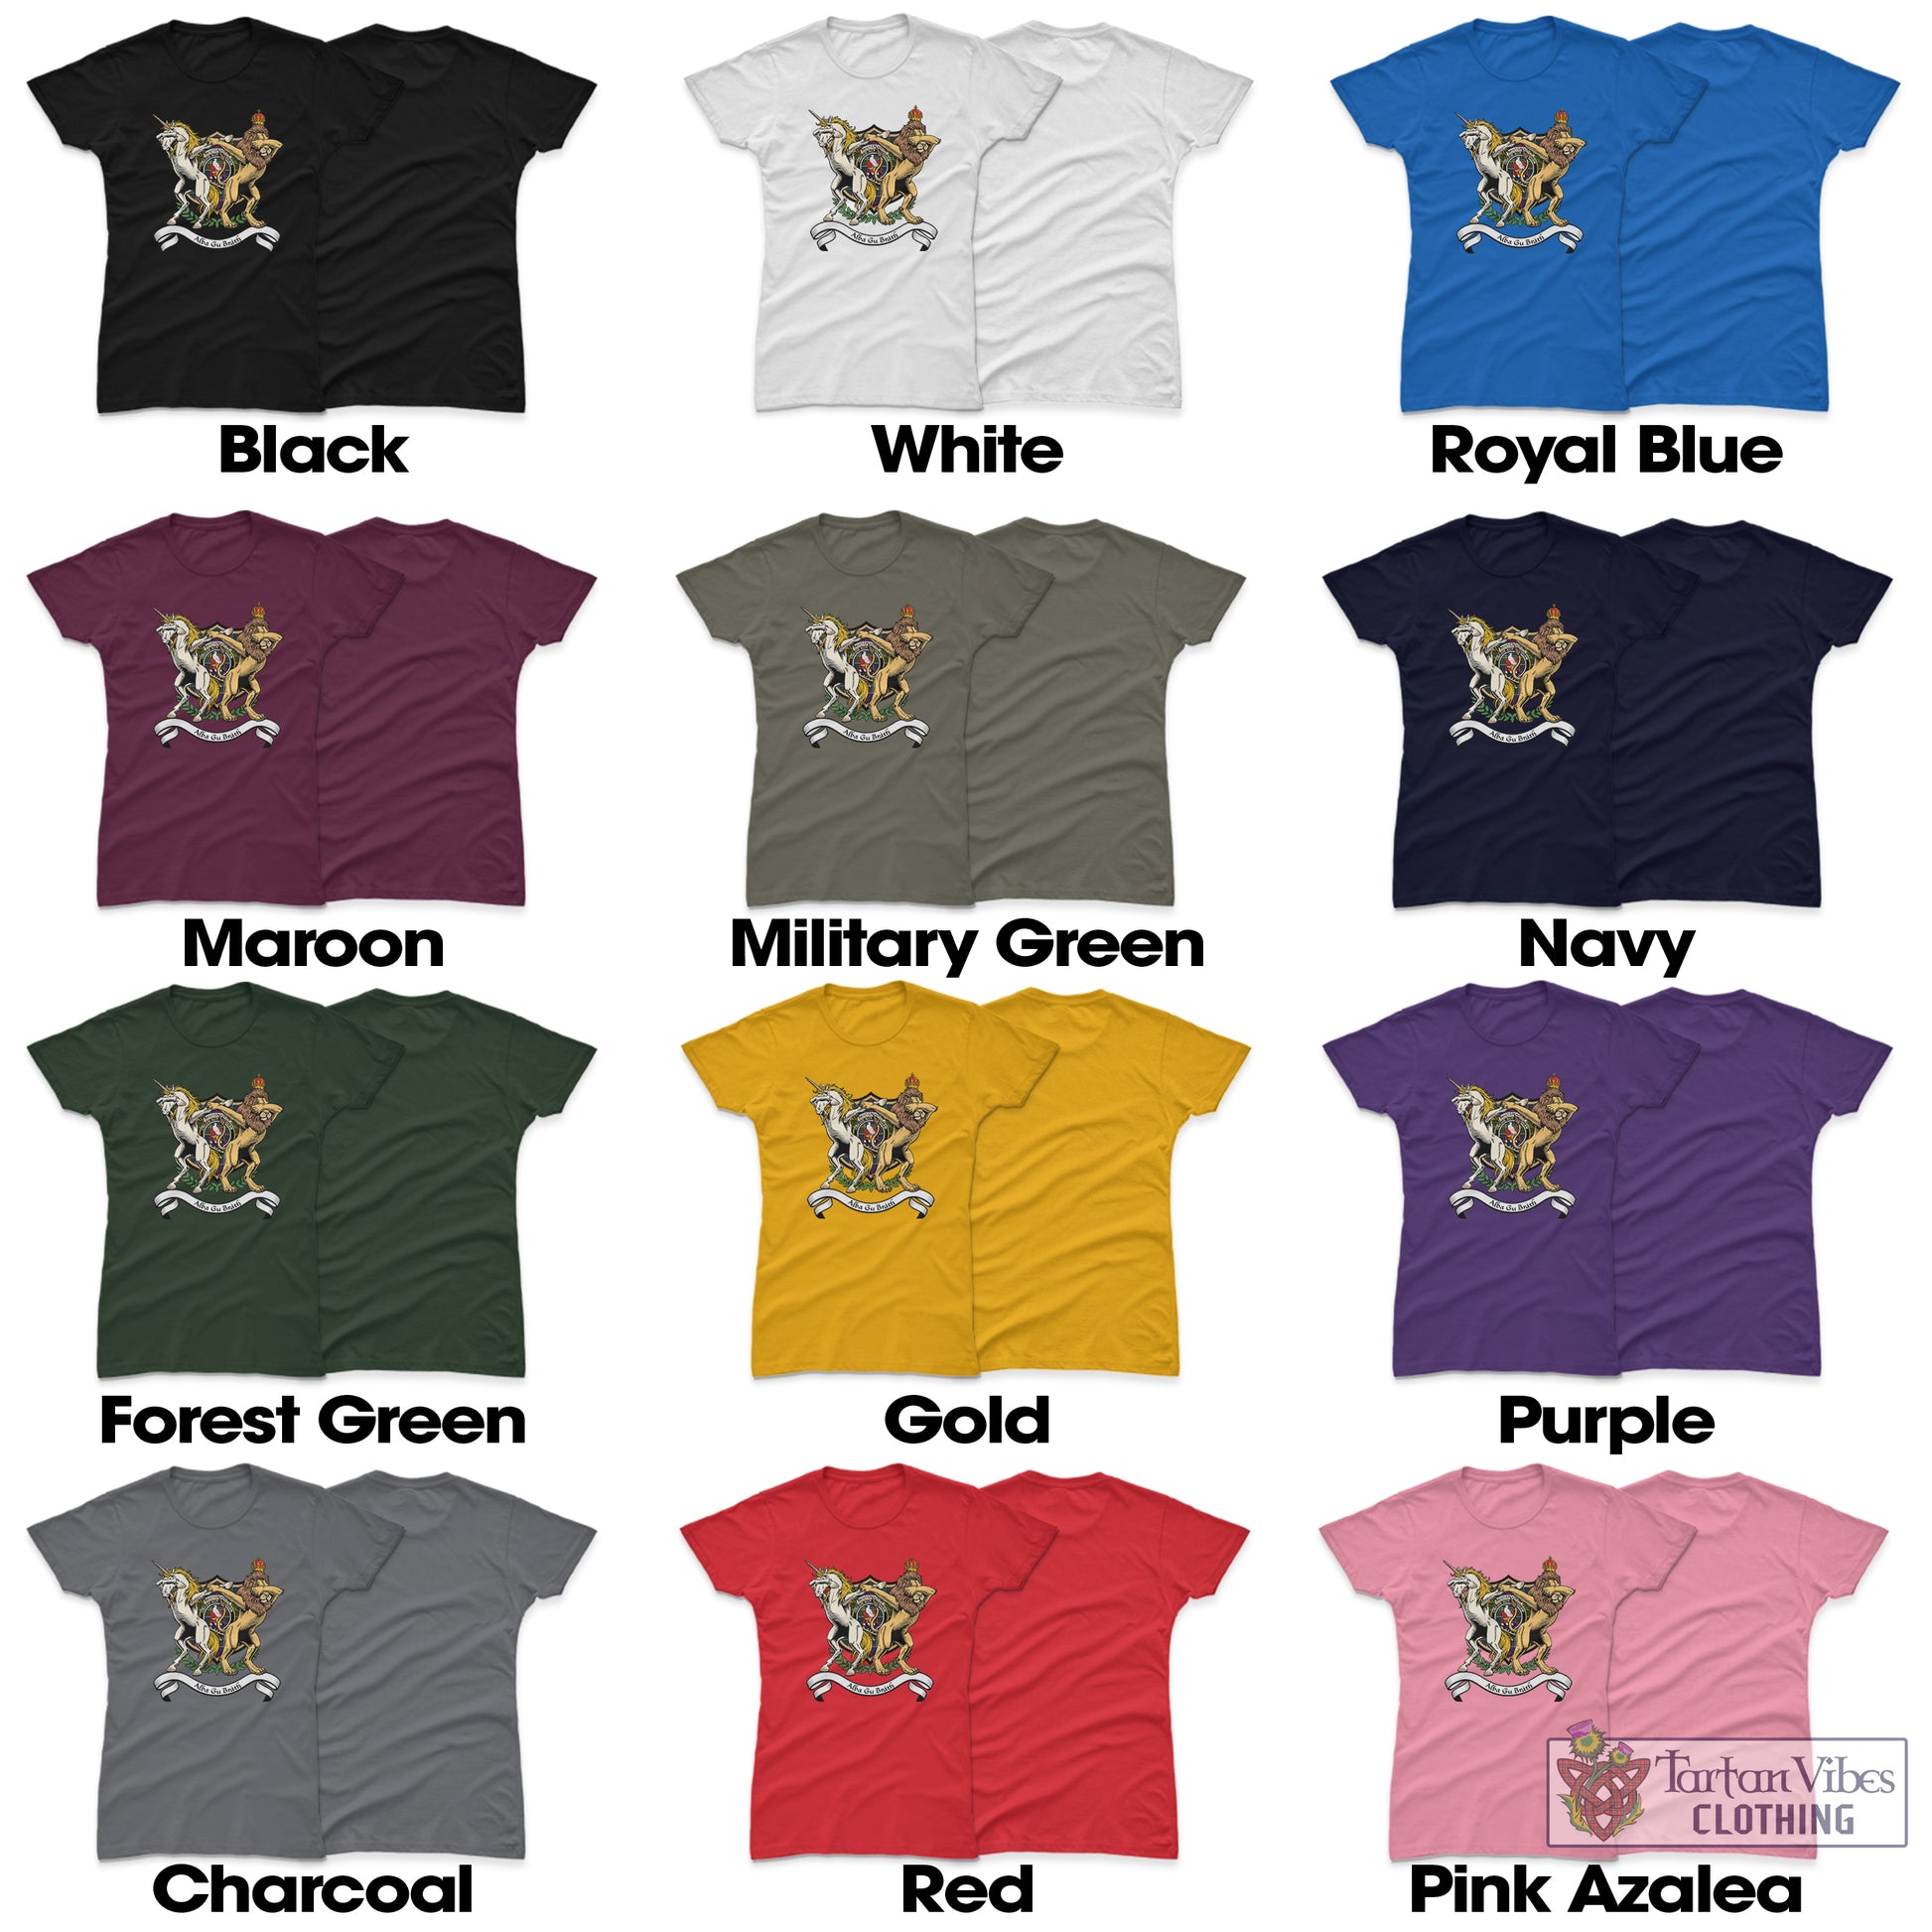 Tartan Vibes Clothing Whitefoord Modern Family Crest Cotton Women's T-Shirt with Scotland Royal Coat Of Arm Funny Style